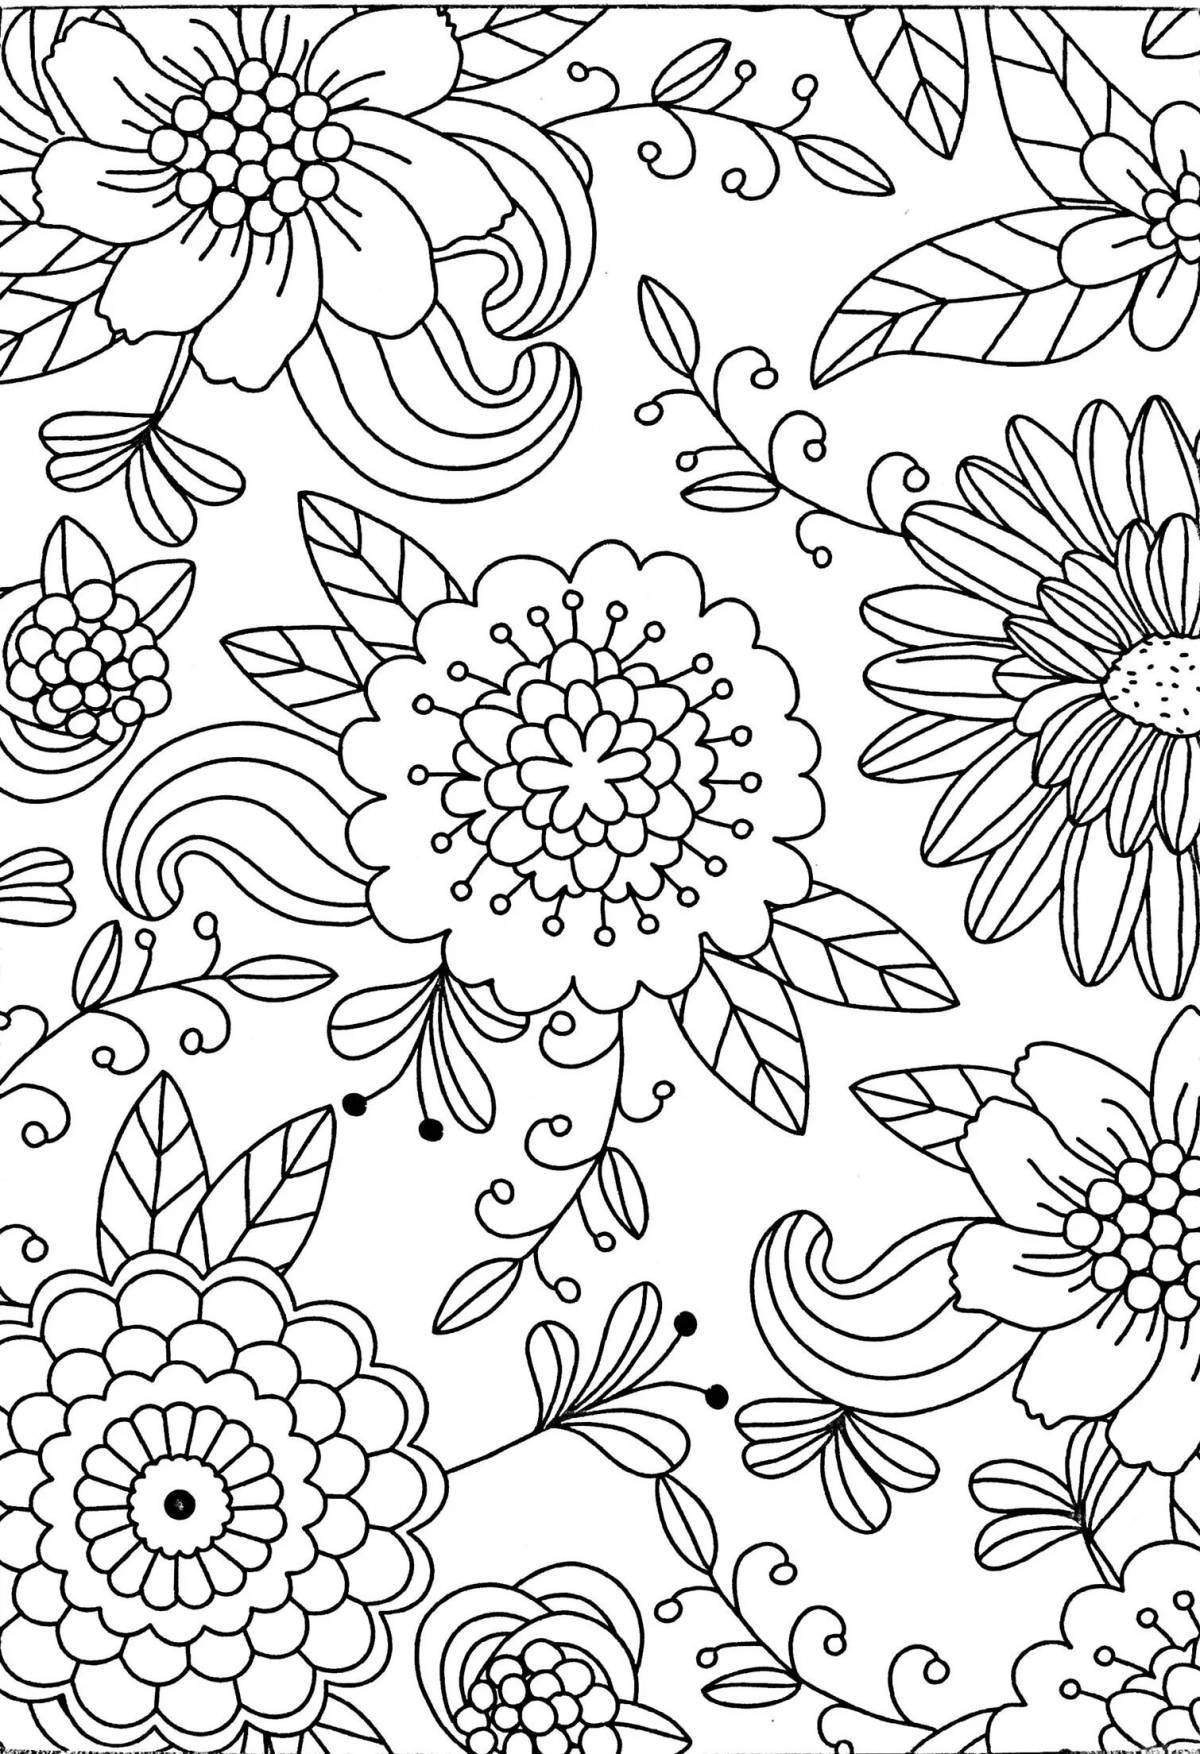 Gorgeous pavlovian scarf coloring book for kids